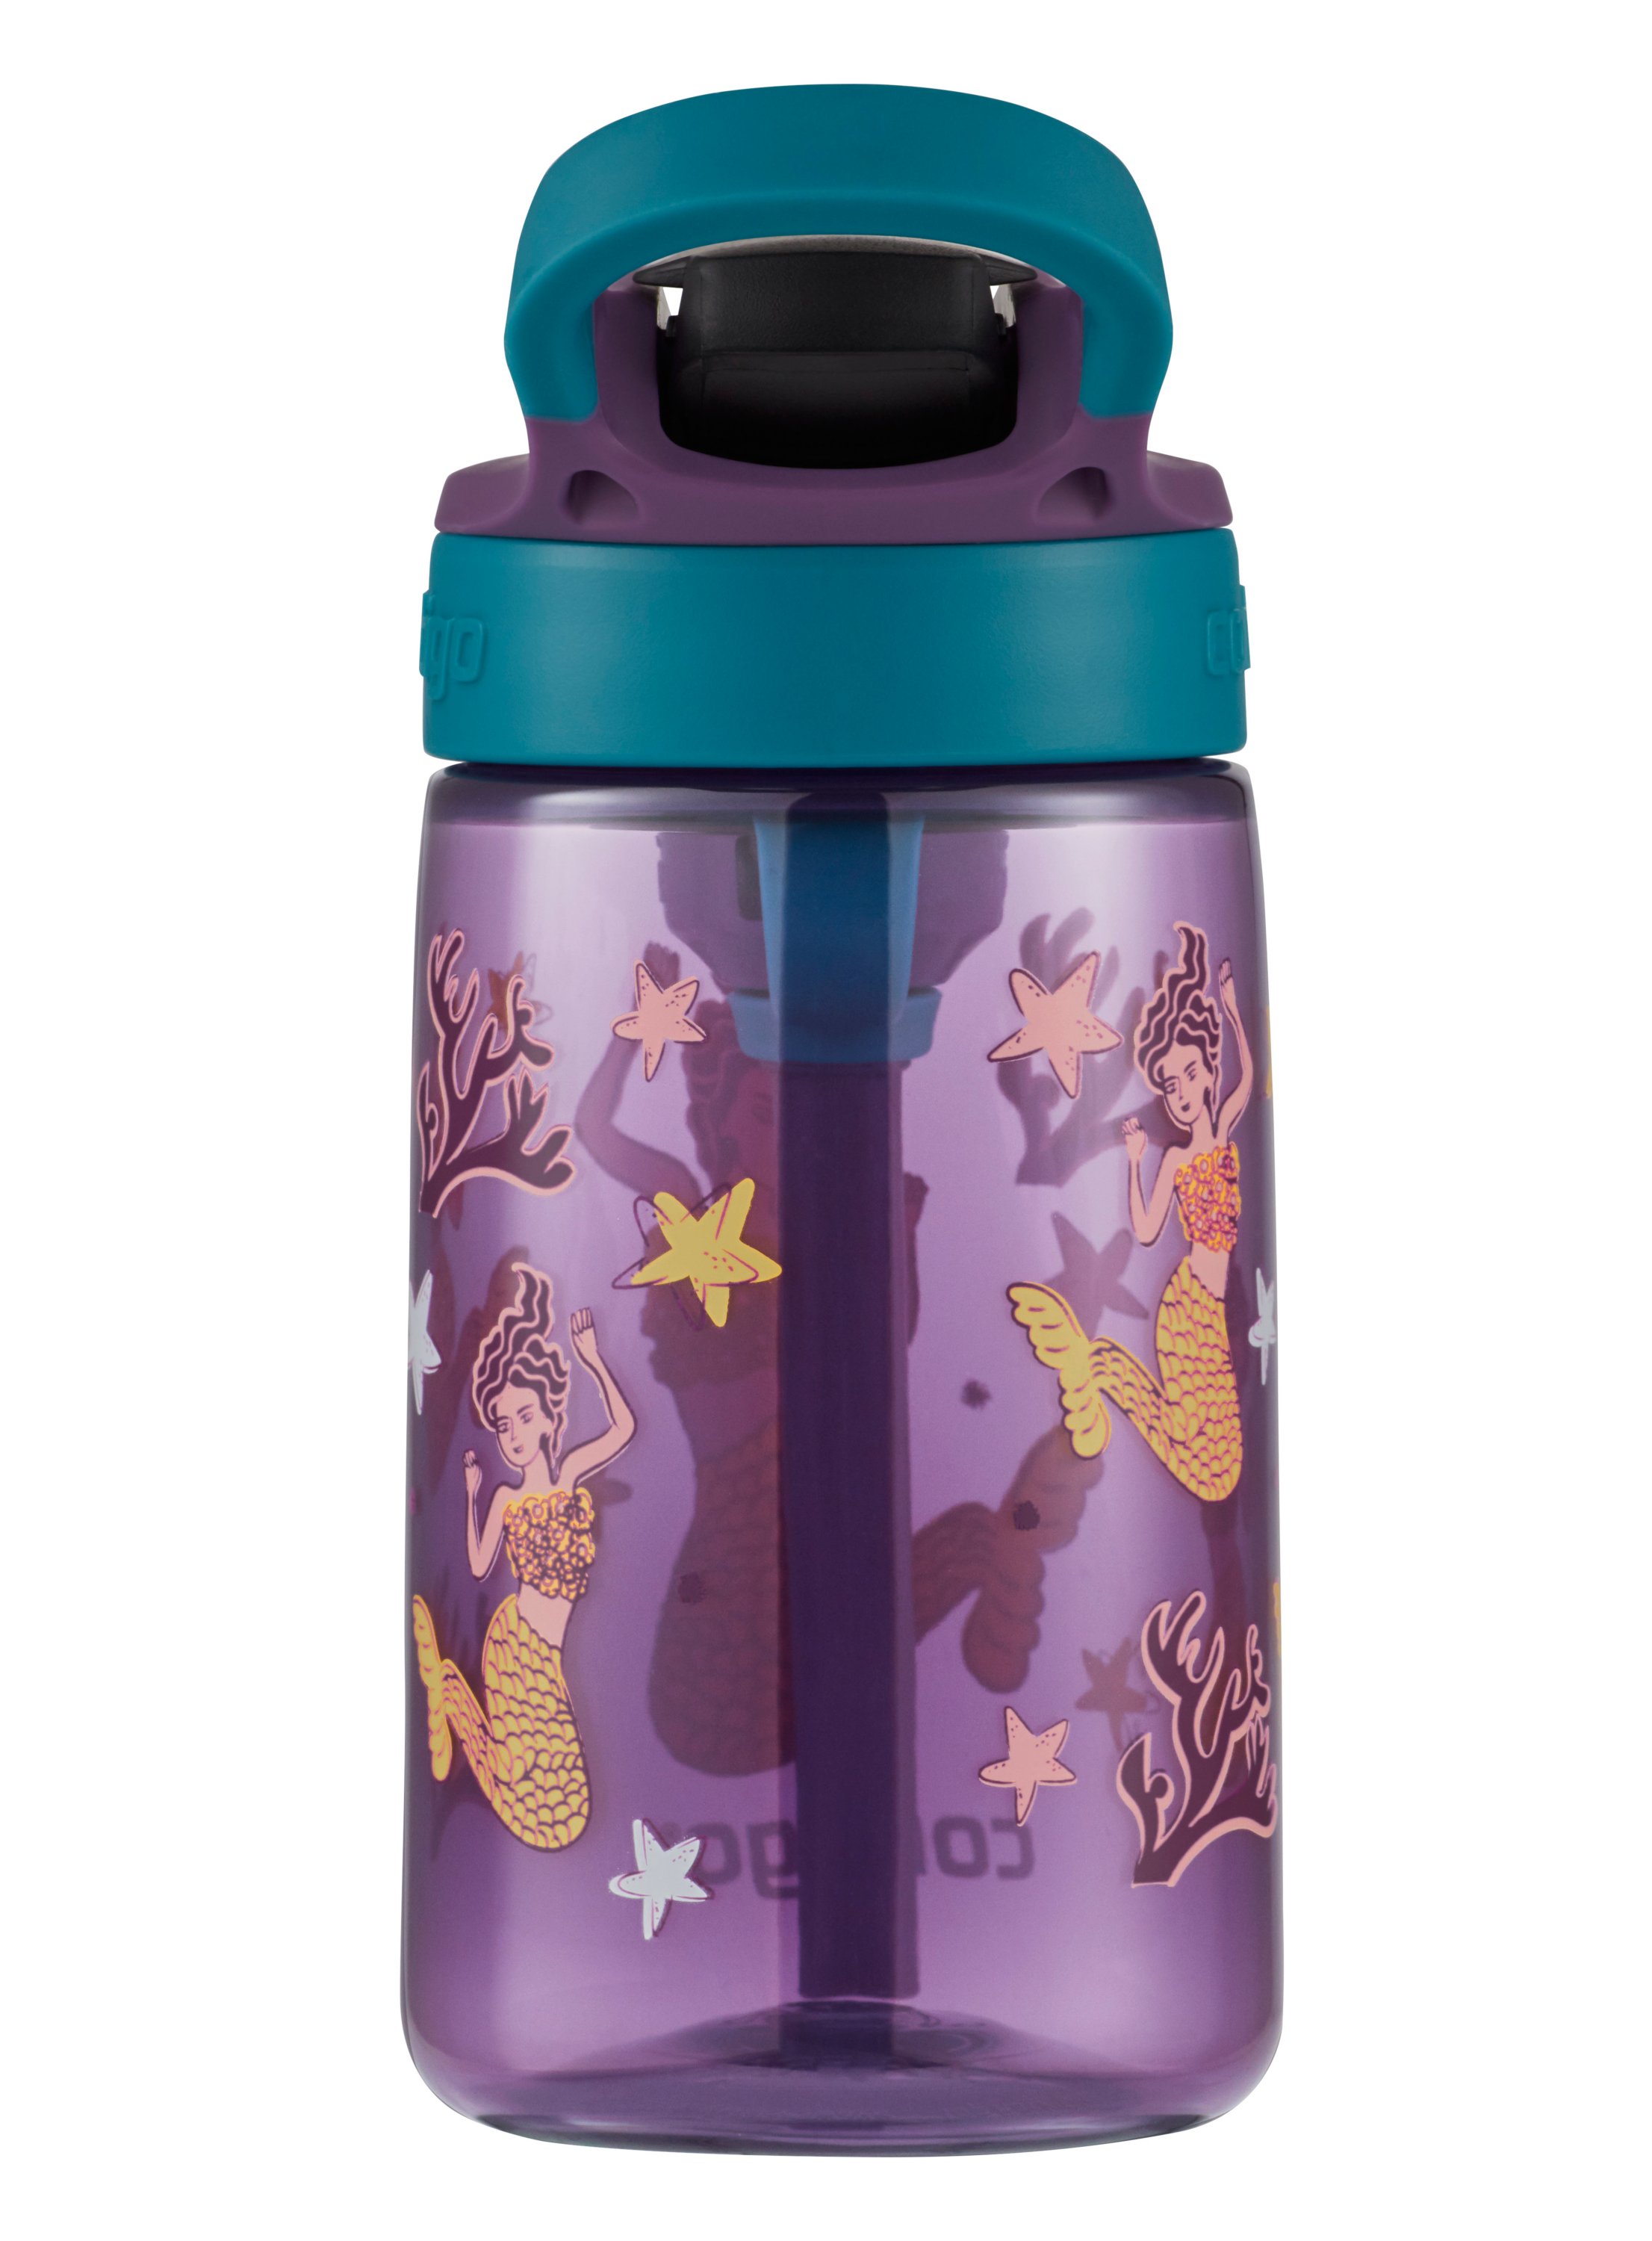 Contigo Aubrey Kids Cleanable Water Bottle with Silicone Straw and  Spill-Proof Lid, Dishwasher Safe, 14oz, Mermaids